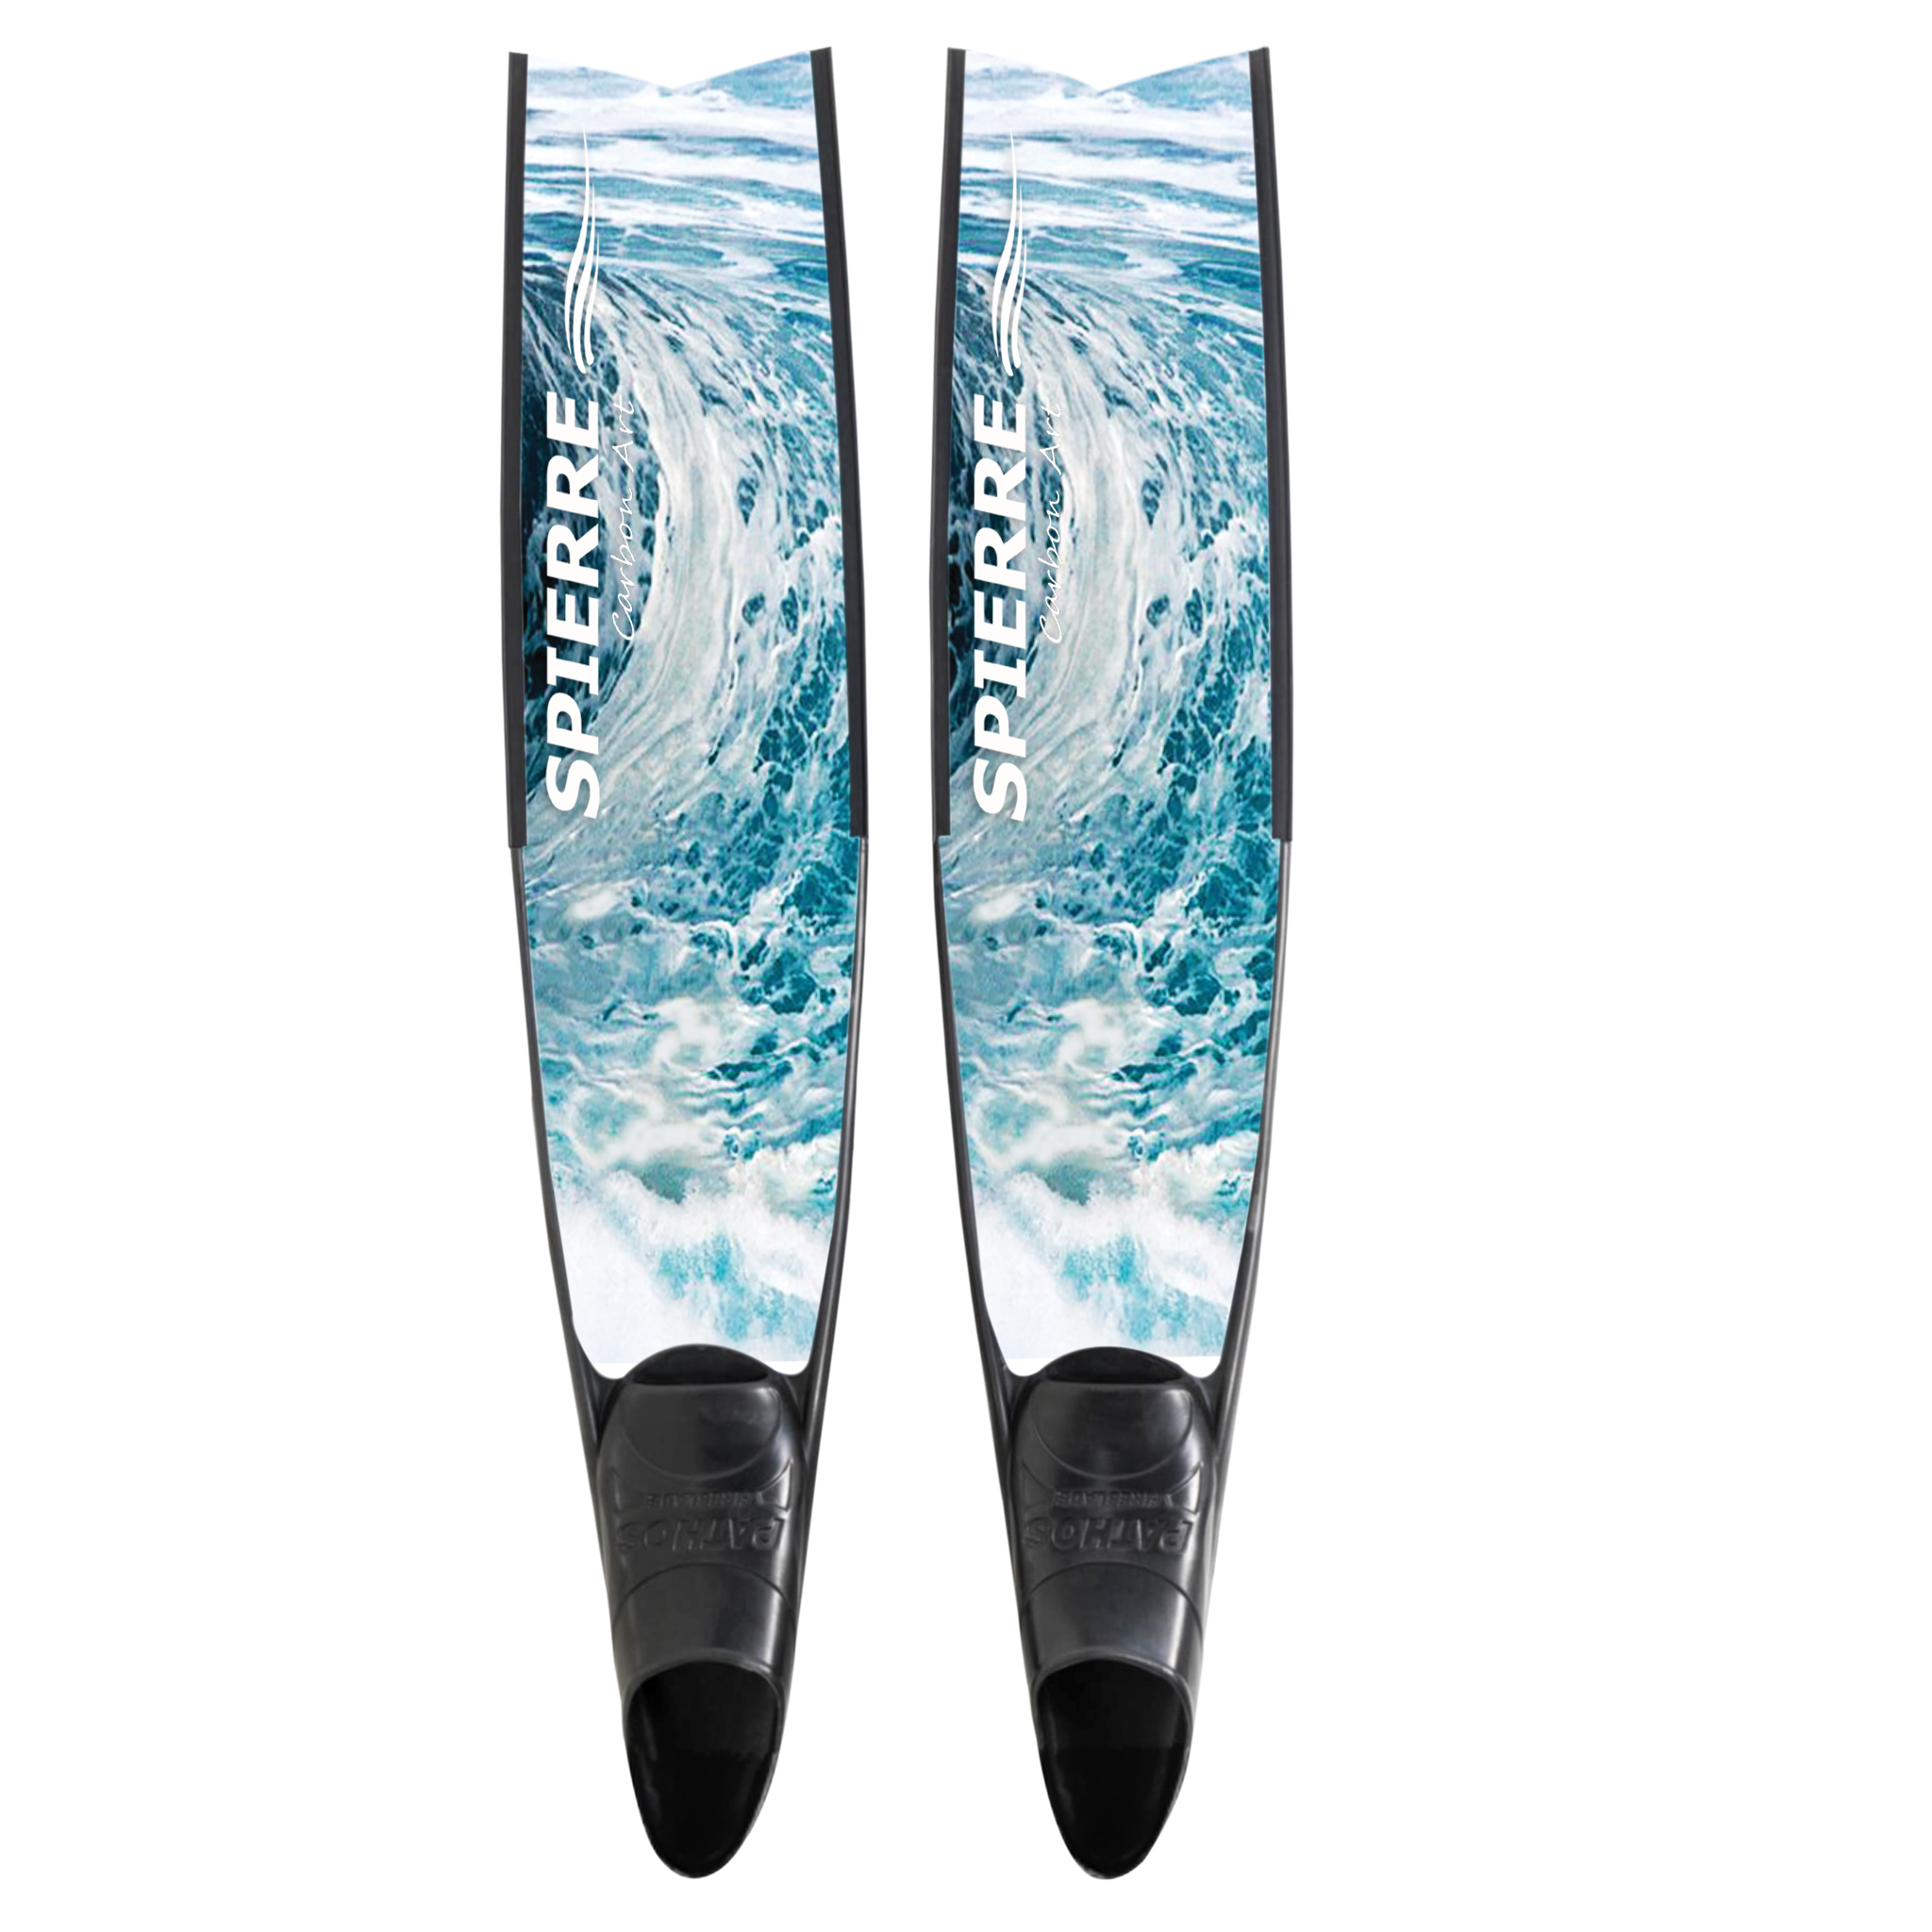 Carbon Fiber Fins (Blades) for freediving, spearfishing and apnea